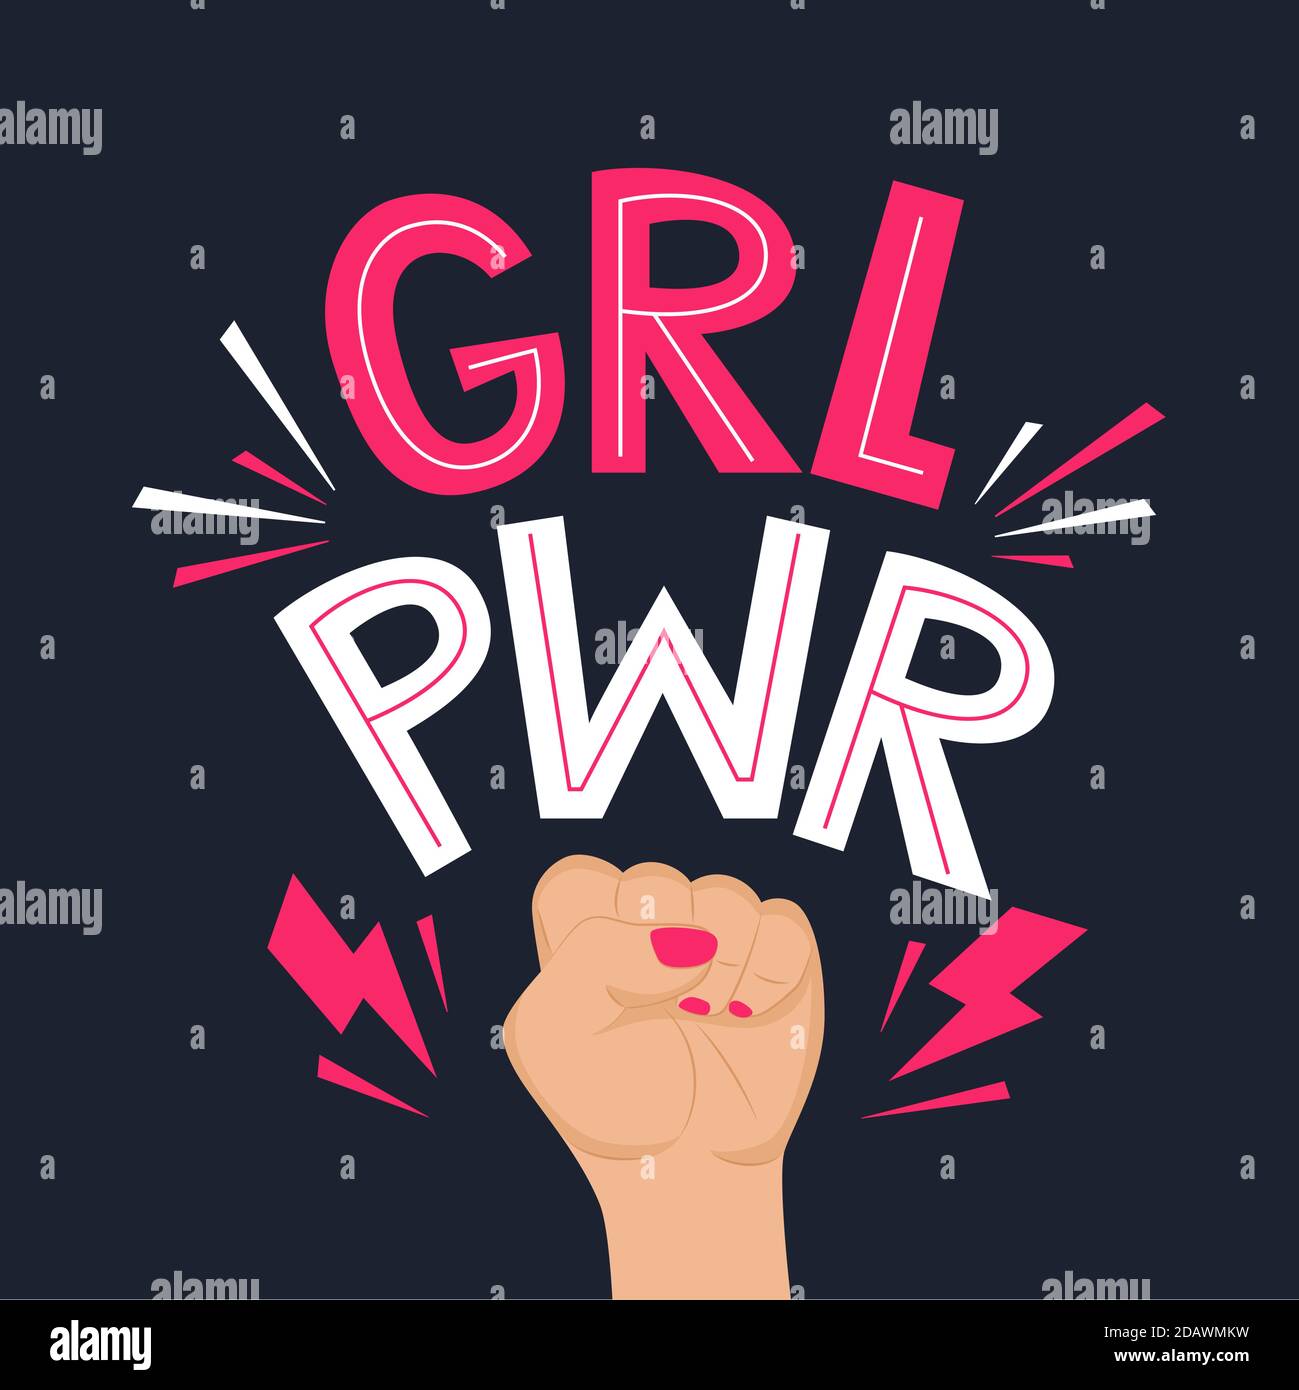 GRL PWR quote. Girl Power cute hand drawing motivation lettering phrase for t-shirts, poster, clothing, stick on laptop, phone, wall. Feminism slogan Stock Vector